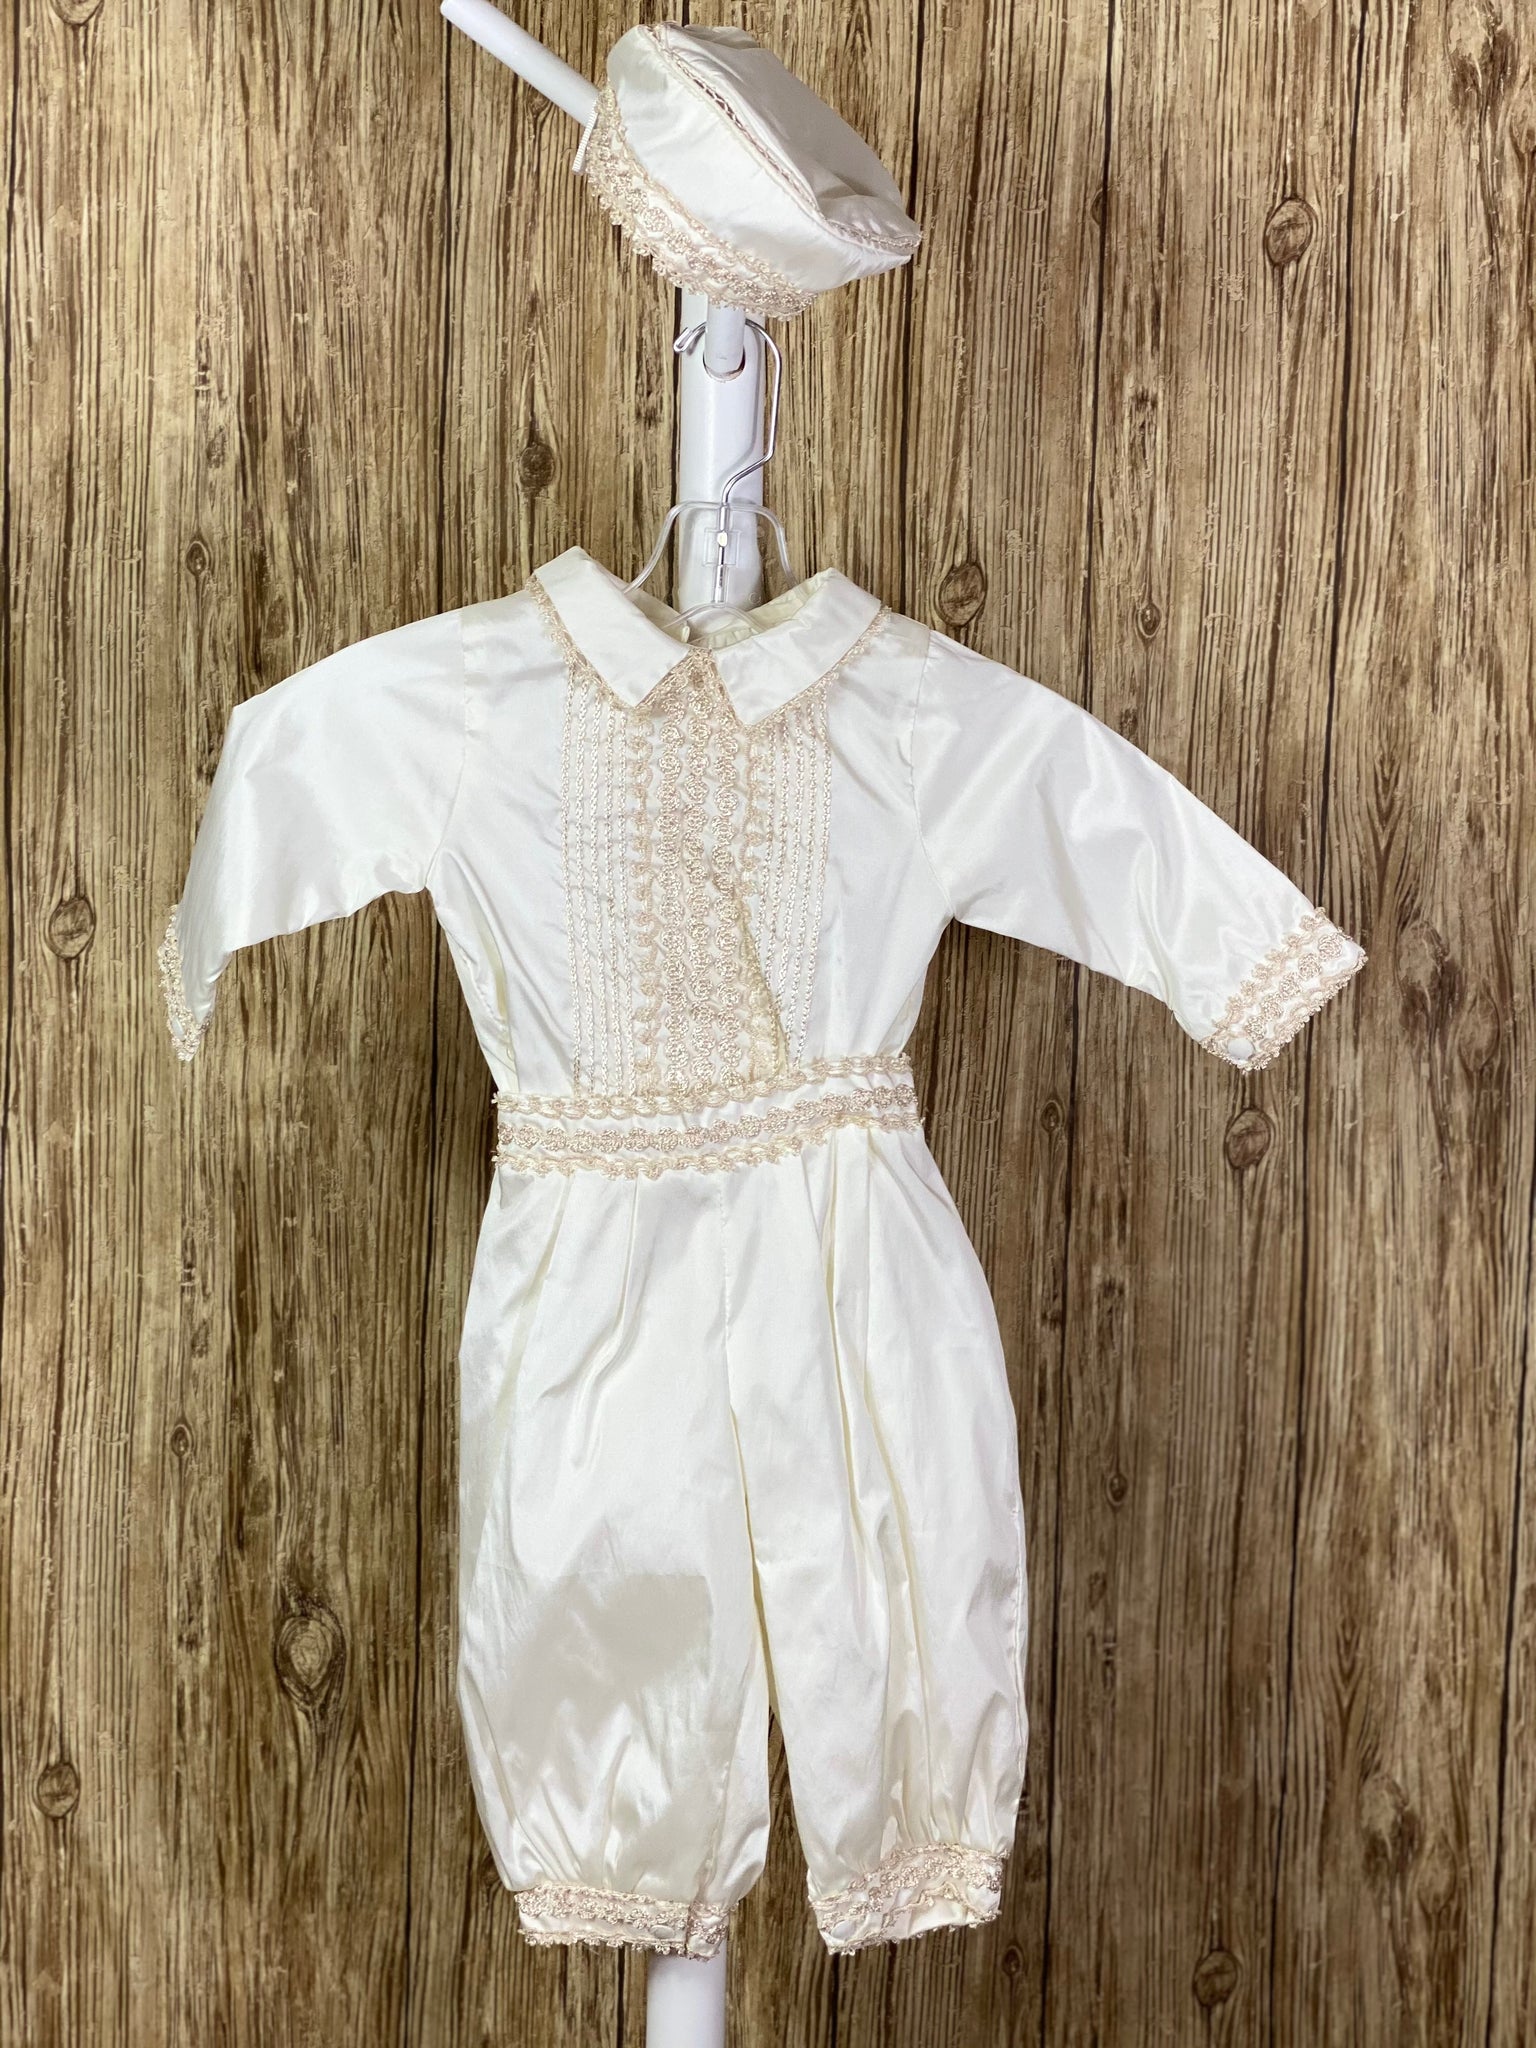 This a beautiful, one-of-a-kind boy’s baptism gown/set.  Lovely clothes for a precious child.  Ivory, size 12M 3-piece set including shirt, pants, beret Layered embroidered trim along cuffs, beret, and cummerbund Intricate braided and embroidered detailing vertical on shirt bodice Thin trim along collar Long sleeves Hand-stitched detailing on beret Button closure on shirt back